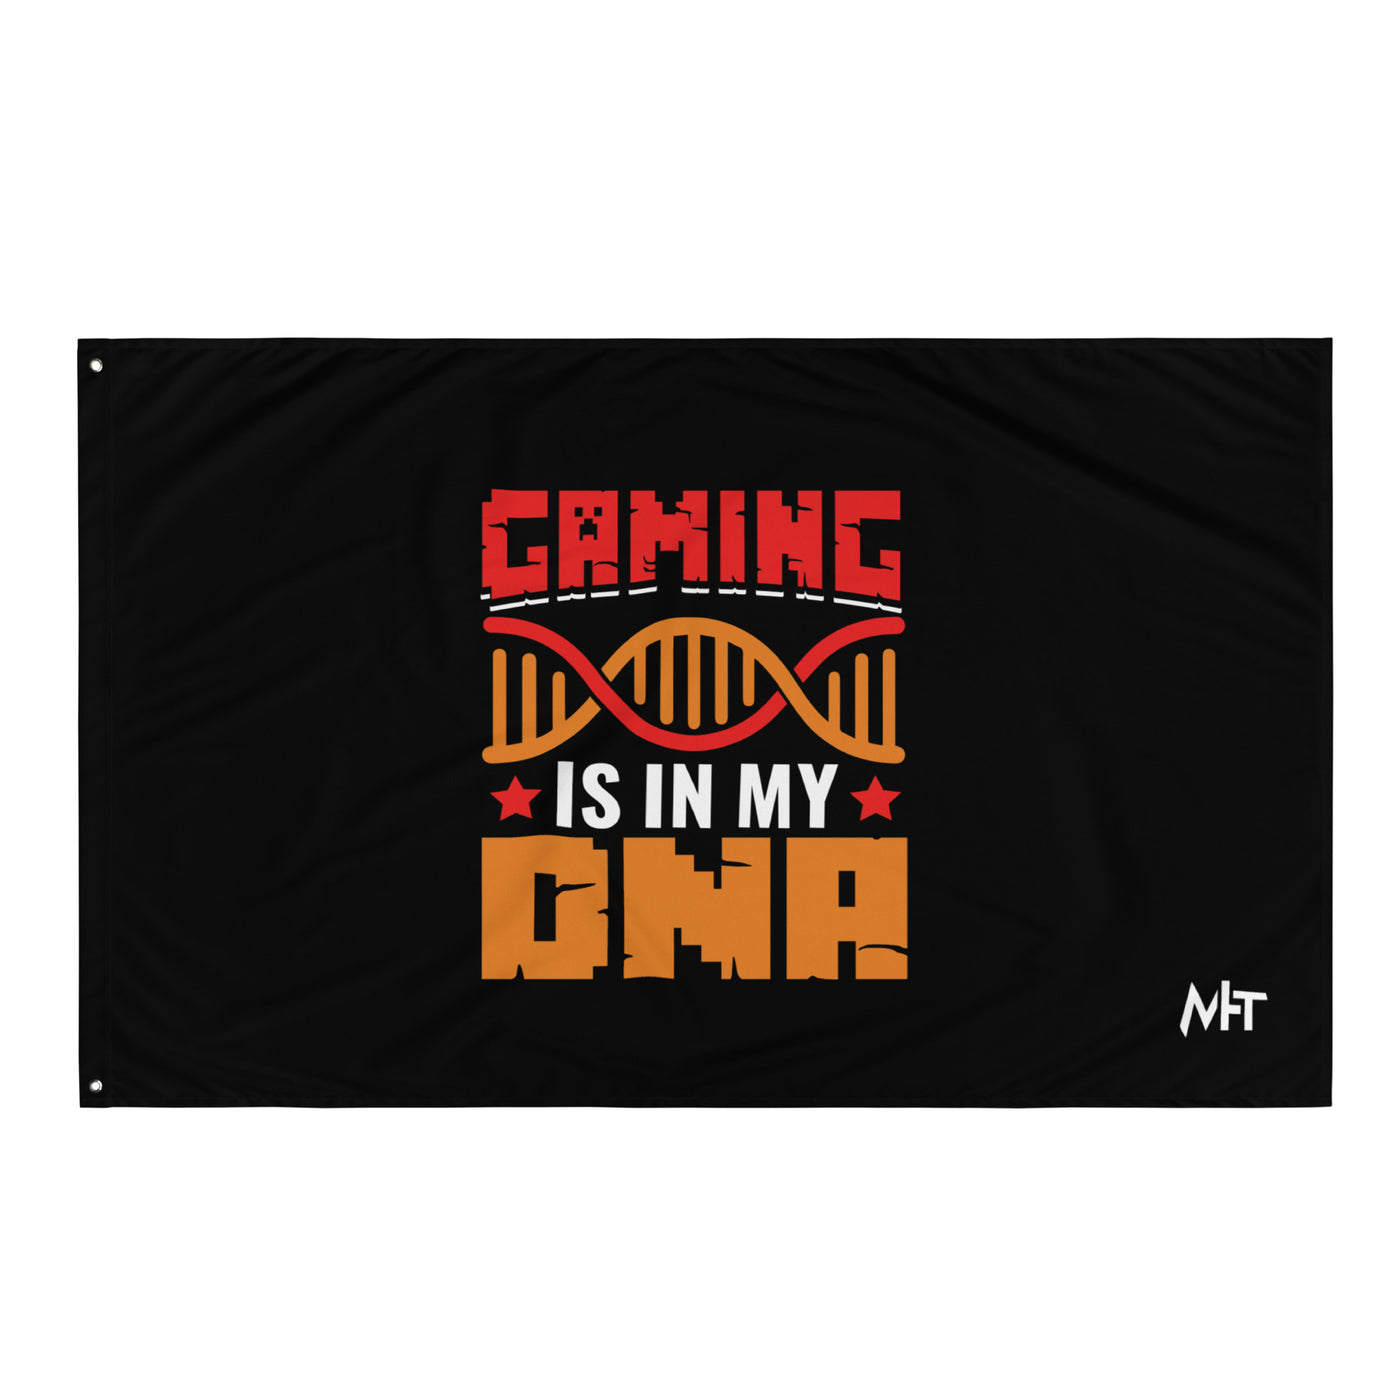 Gaming is in My DNA - Flag